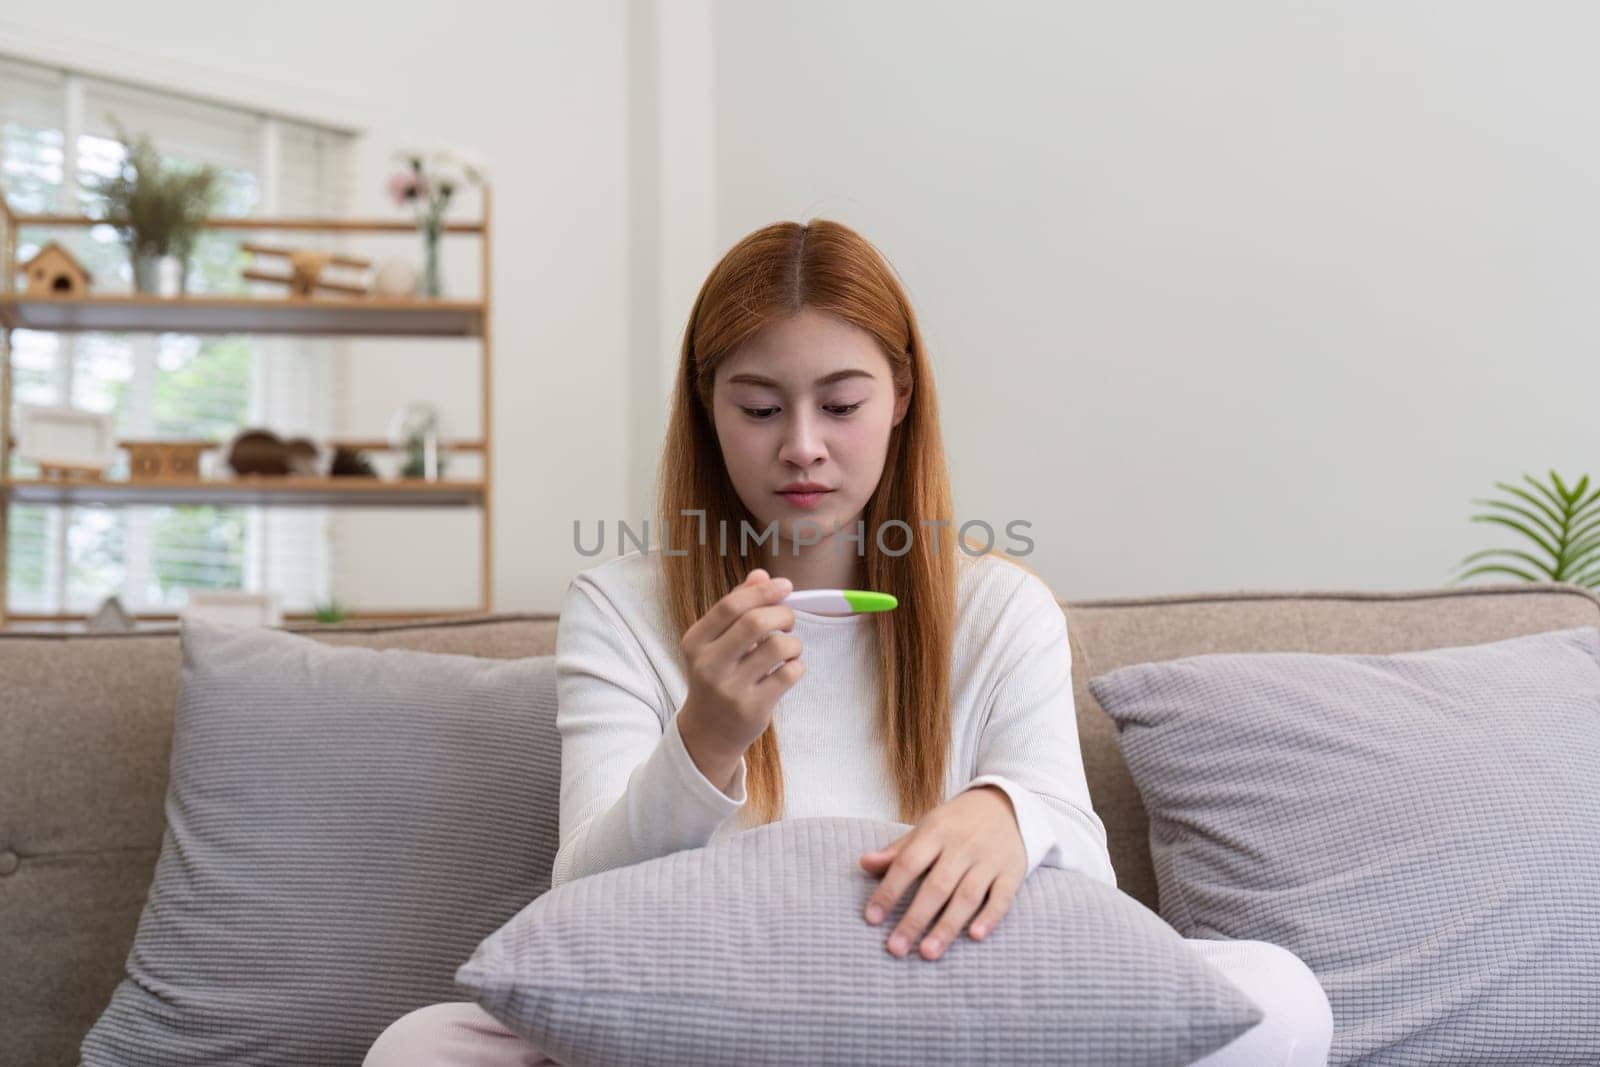 Young woman checking pregnancy test at home, feeling concerned. Concept of uncertainty and personal health.